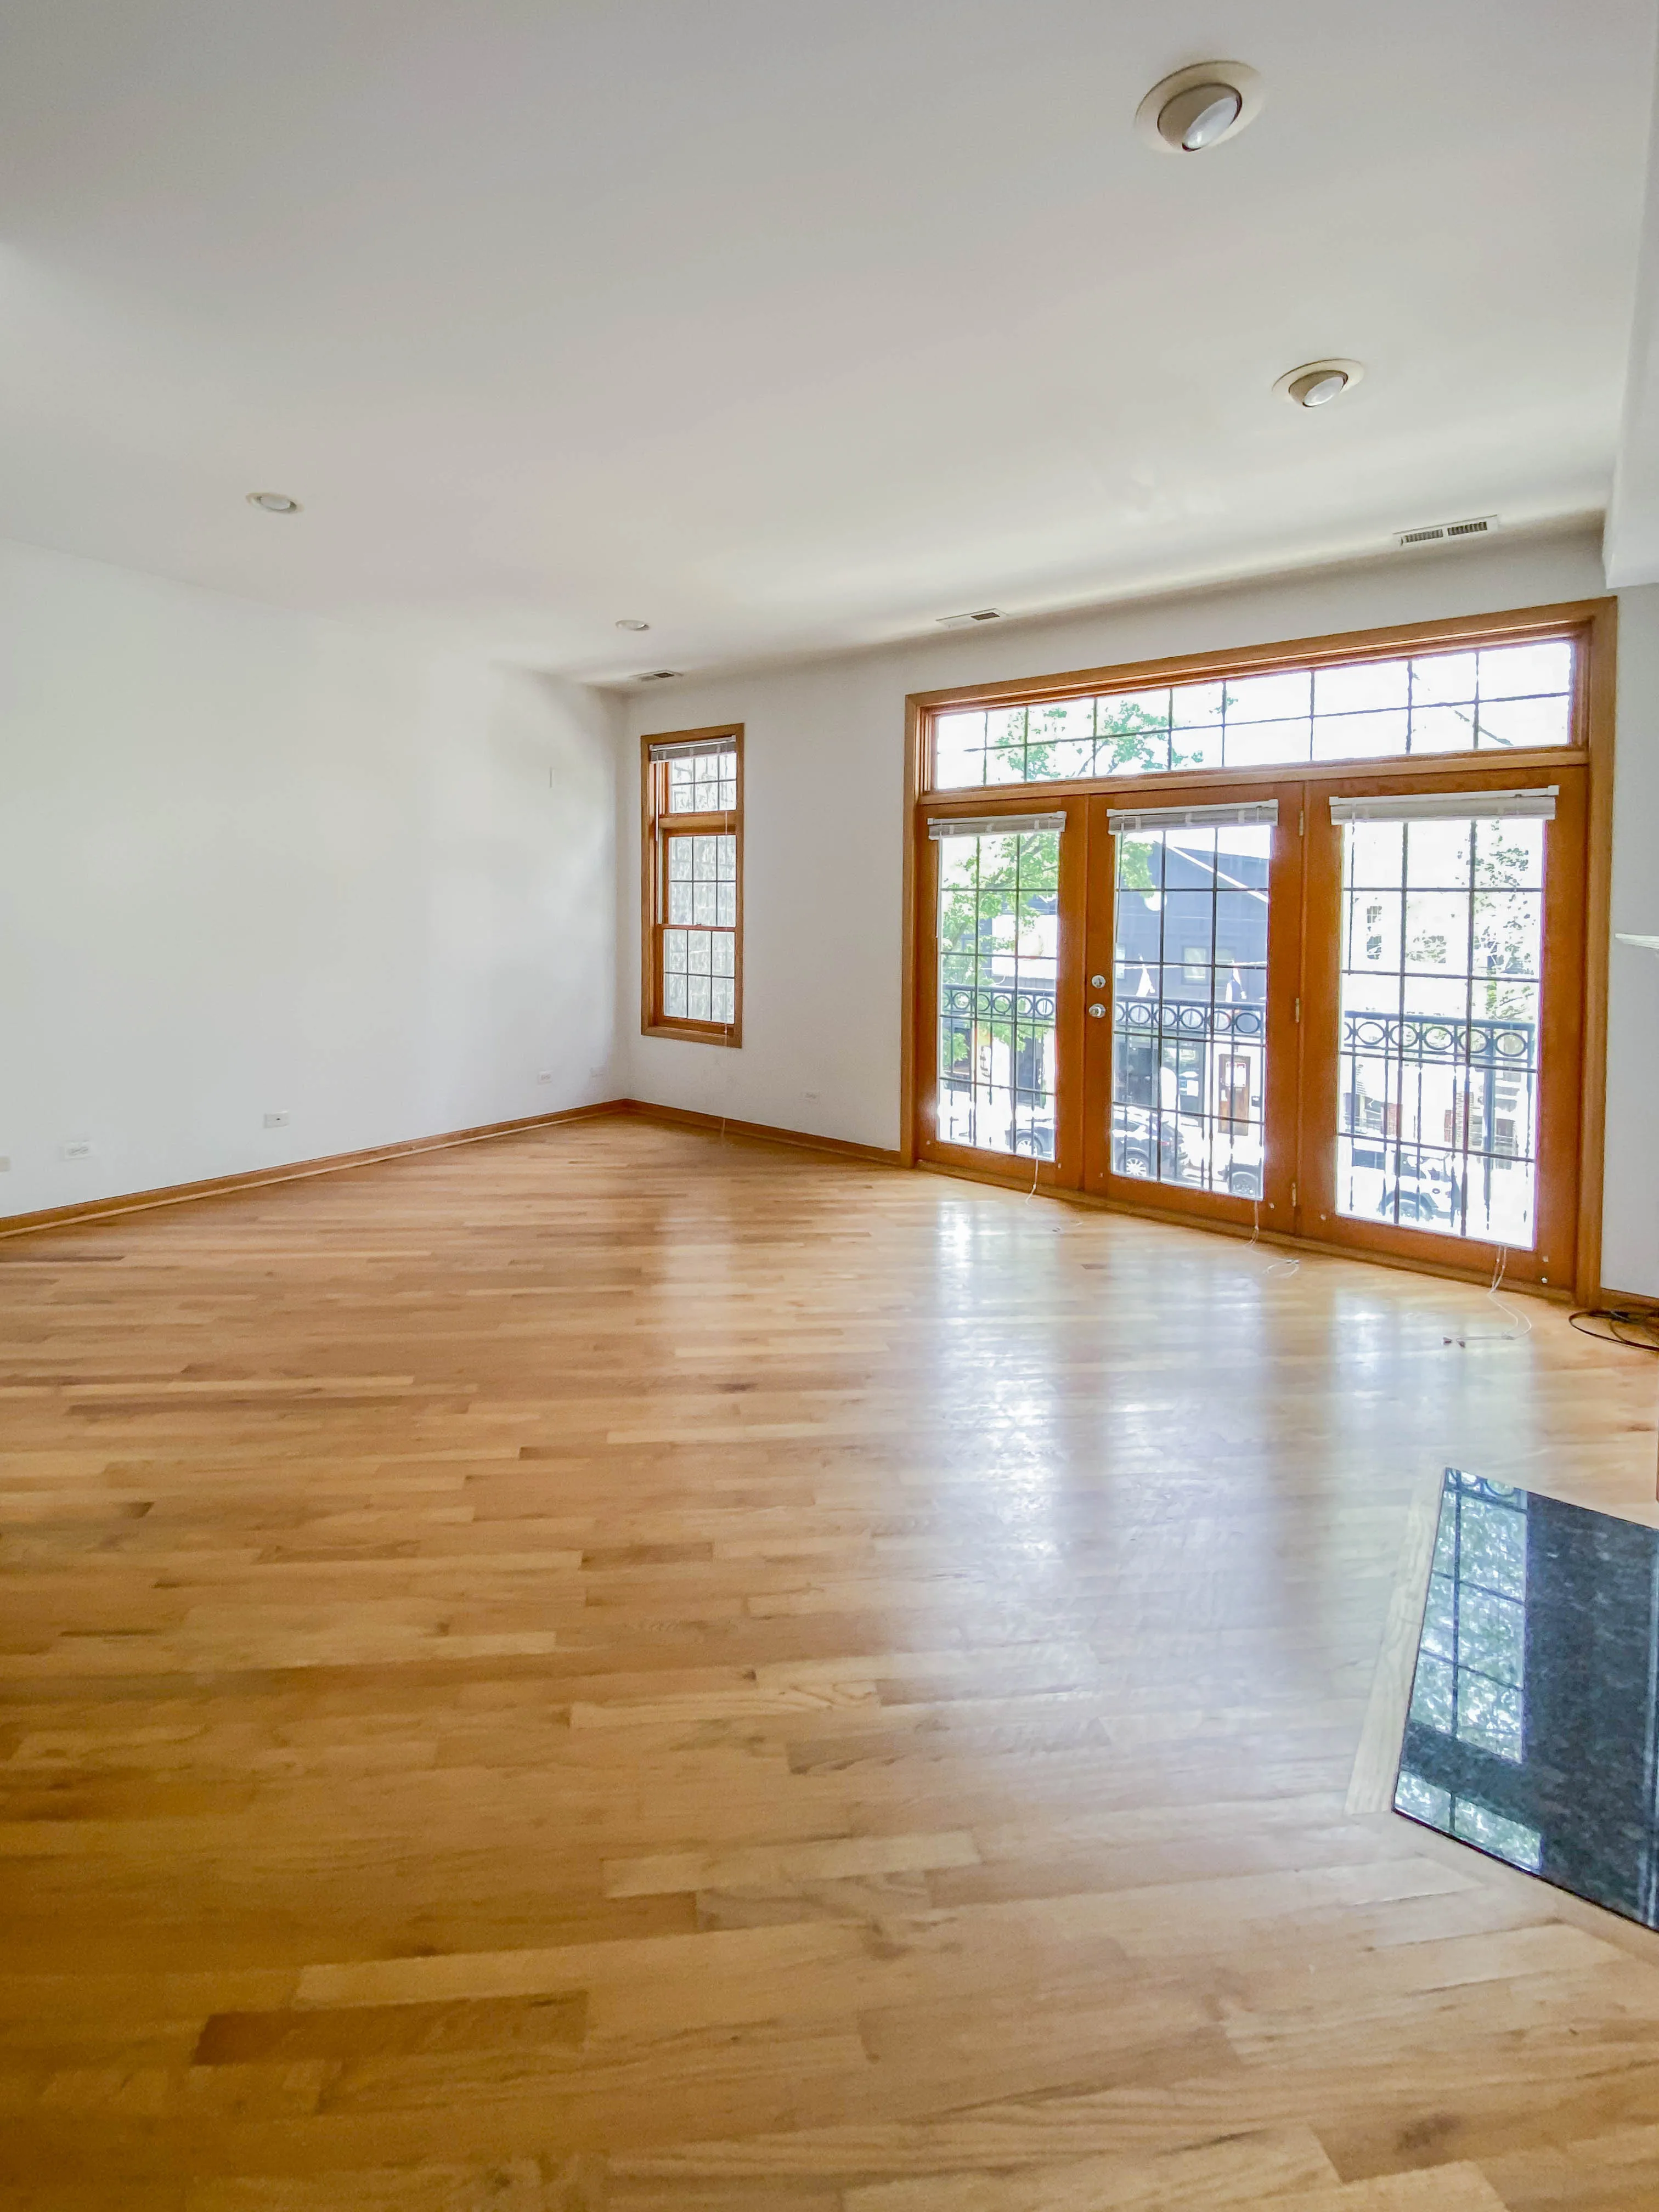 2551 N SOUTHPORT AVE 60614-unit#2-Chicago-IL